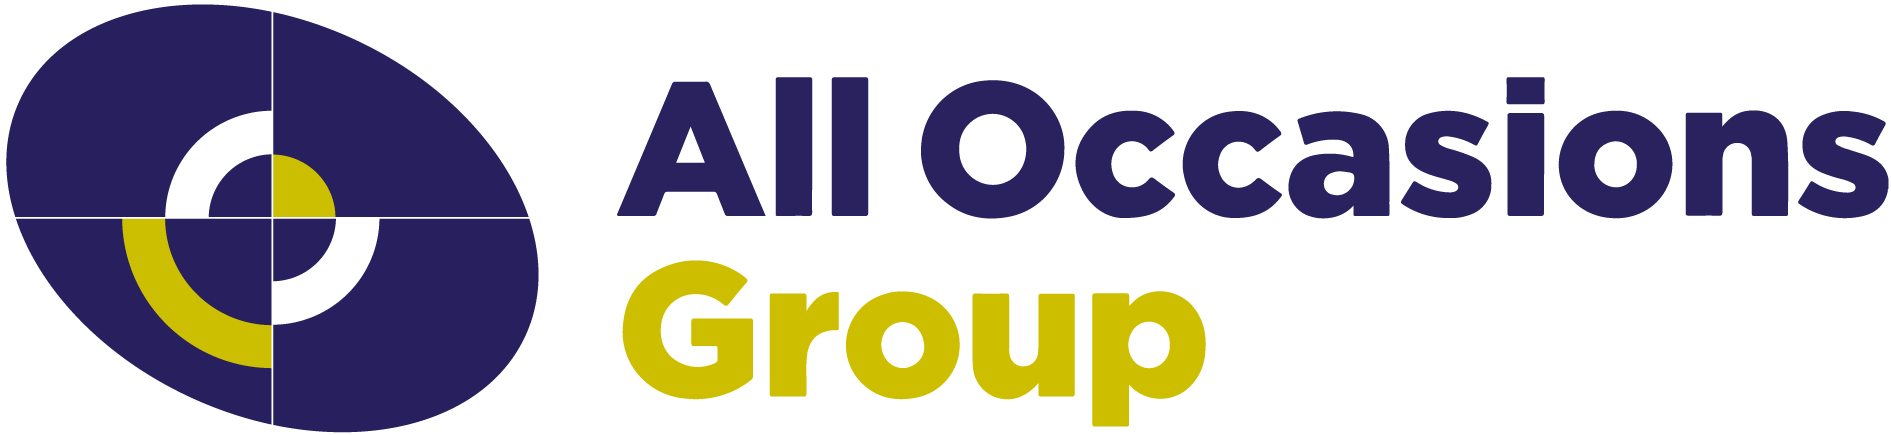 All Occasions Group